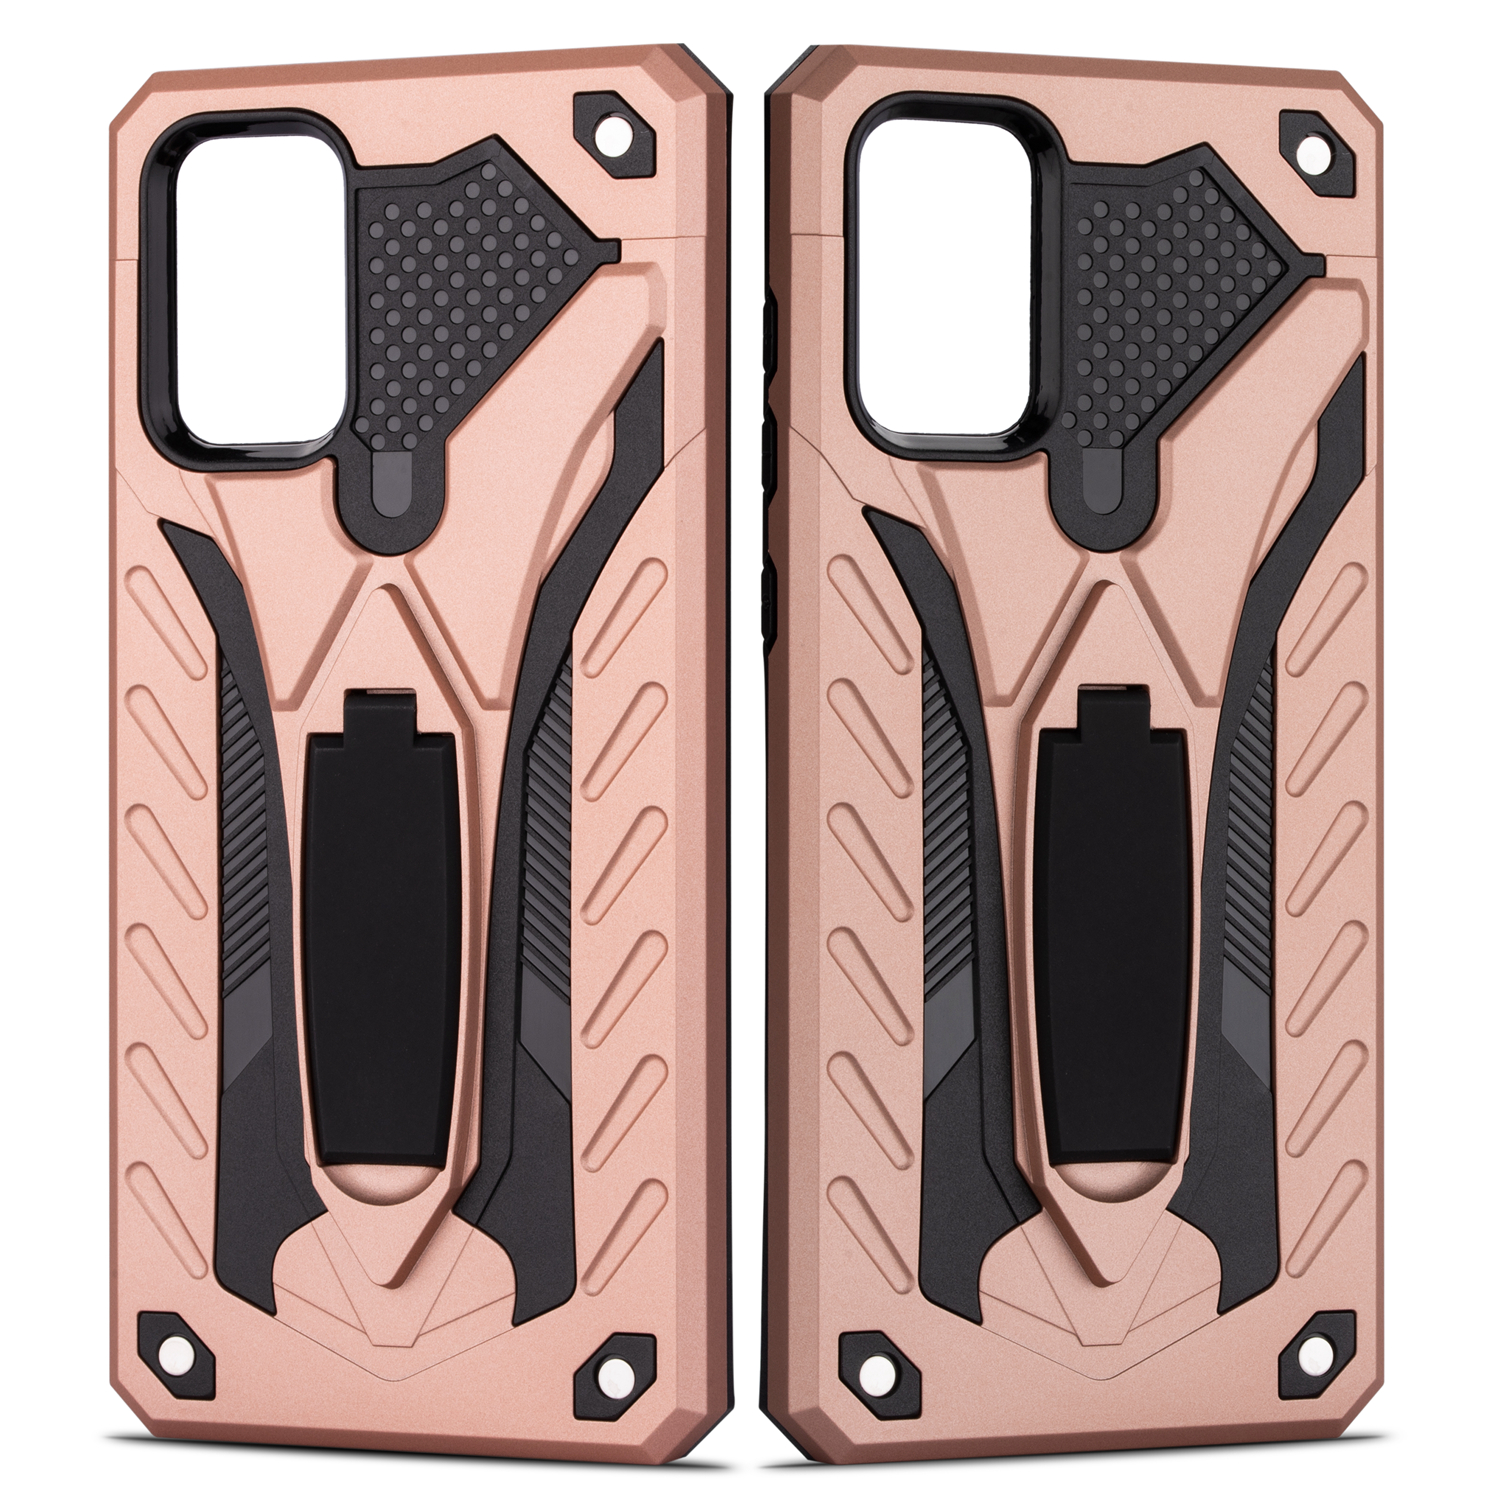 Bakeey-for-Xiaomi-Redmi-9A-Case-Armor-Shockproof-Anti-Fingerprint-with-Ring-Bracket-Stand-PC--TPU-Pr-1726498-7